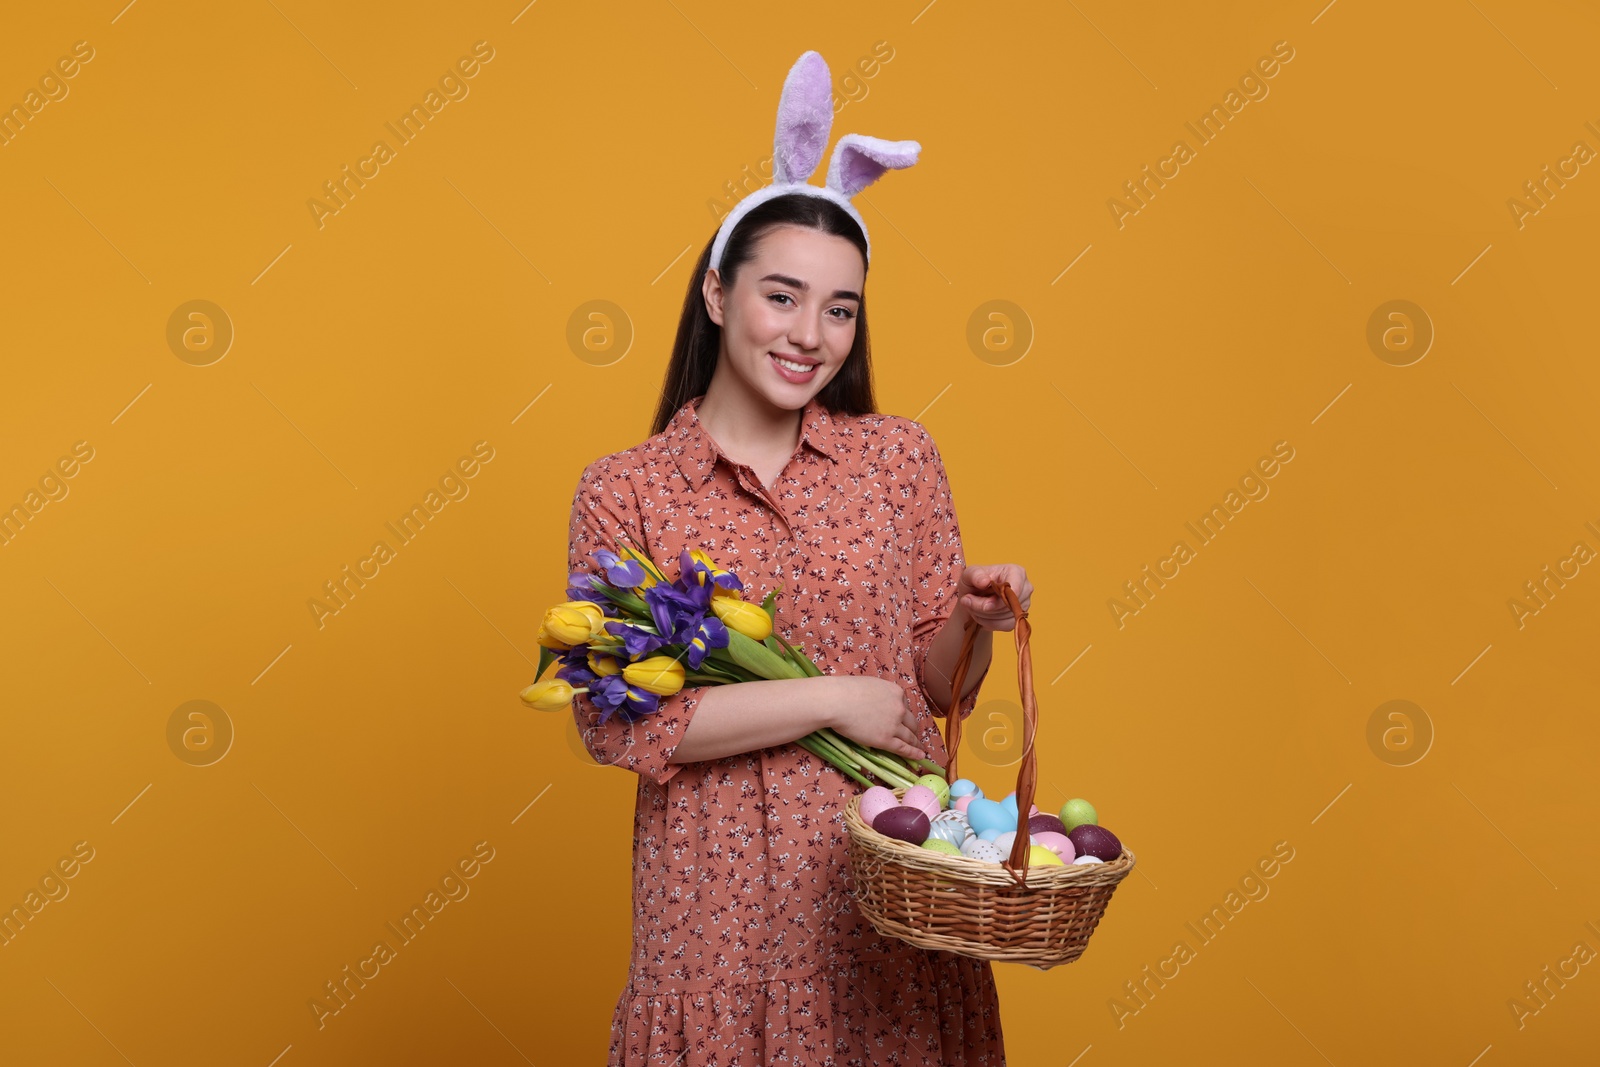 Photo of Happy woman in bunny ears headband holding wicker basket with painted Easter eggs and bouquet of flowers on orange background